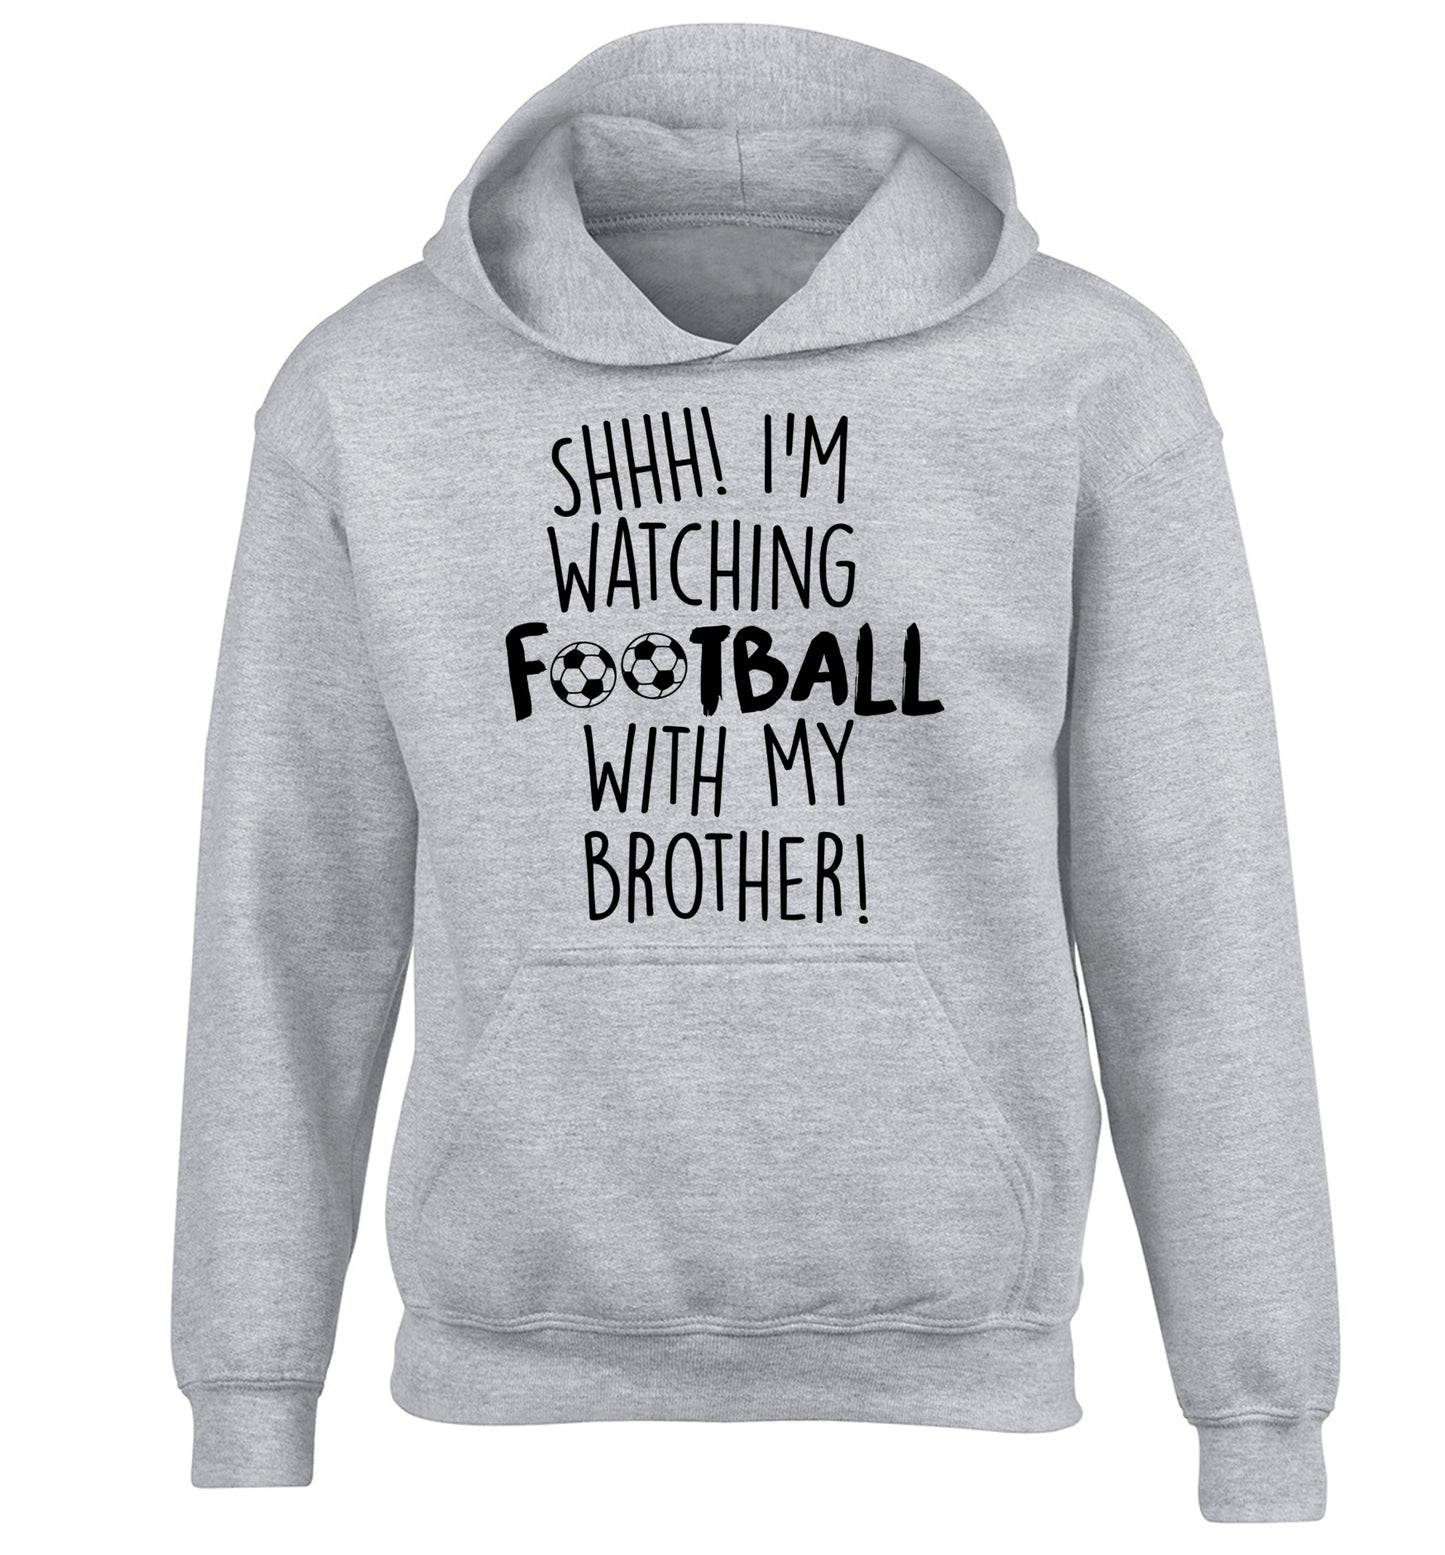 Shhh I'm watching football with my brother children's grey hoodie 12-14 Years